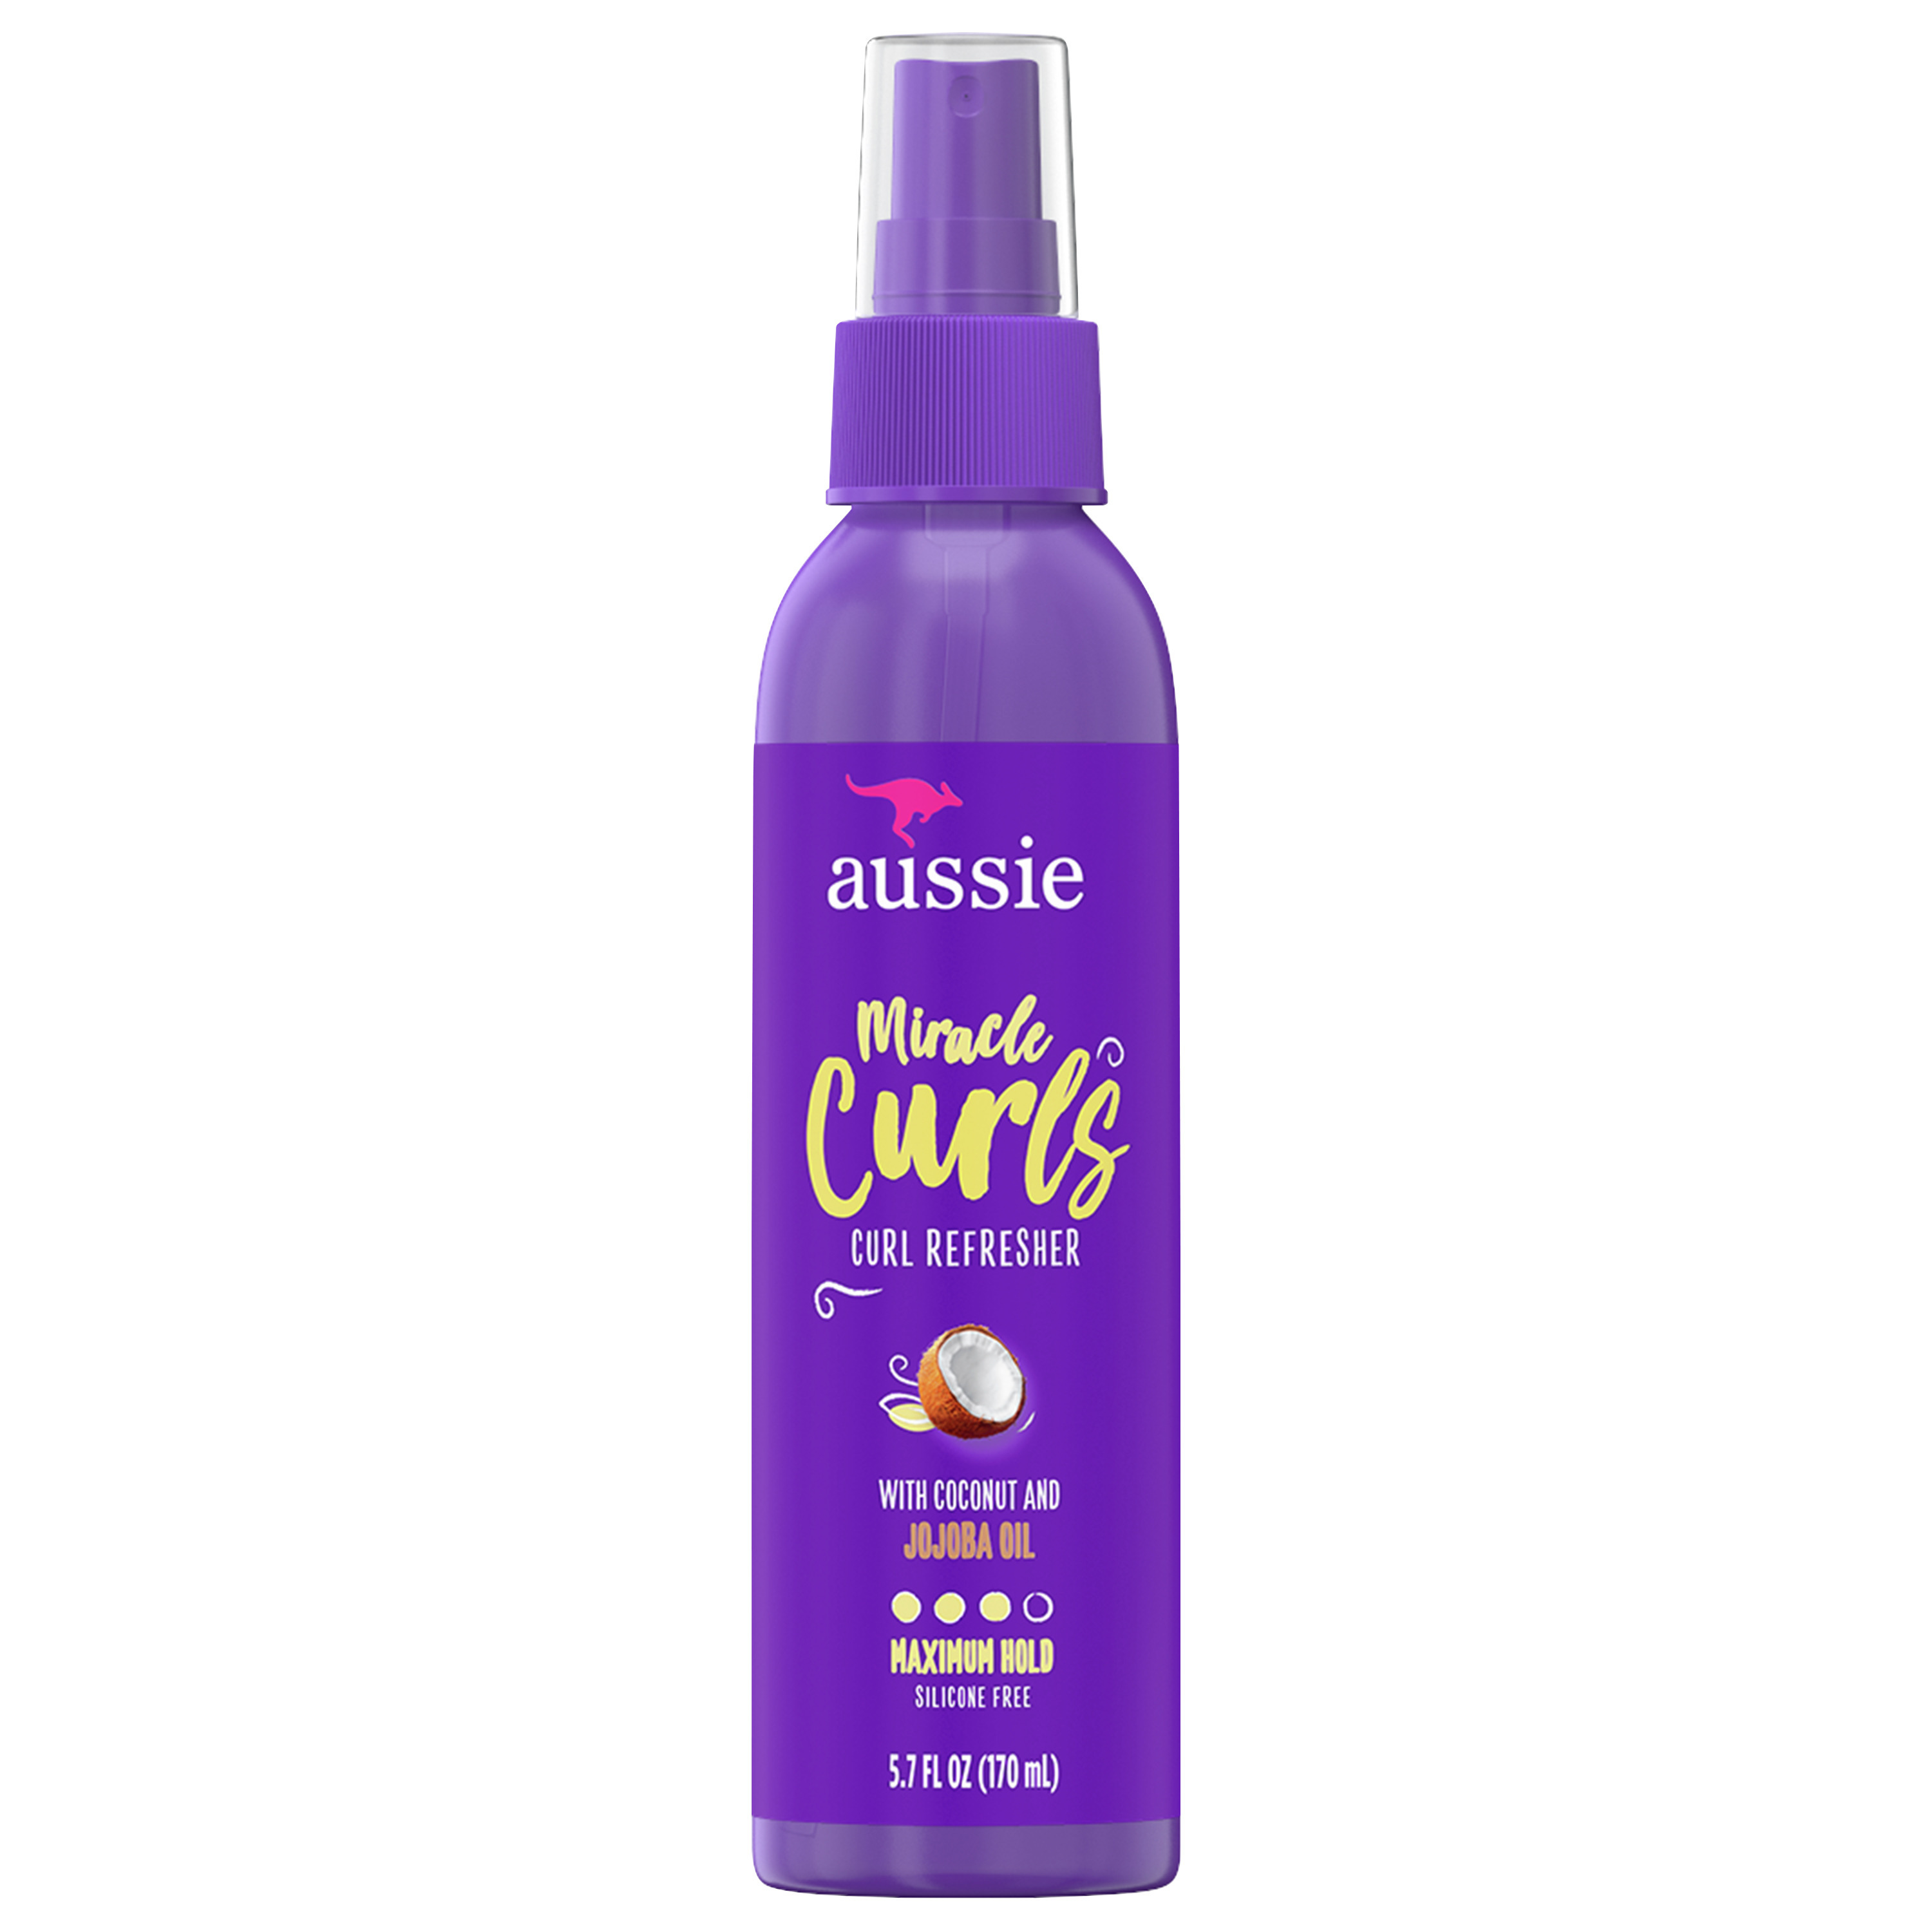 Aussie Miracle Curls Curl Refresher Spray Gel, Max Hold, for All Hair Types 5.7 fl oz - image 1 of 10